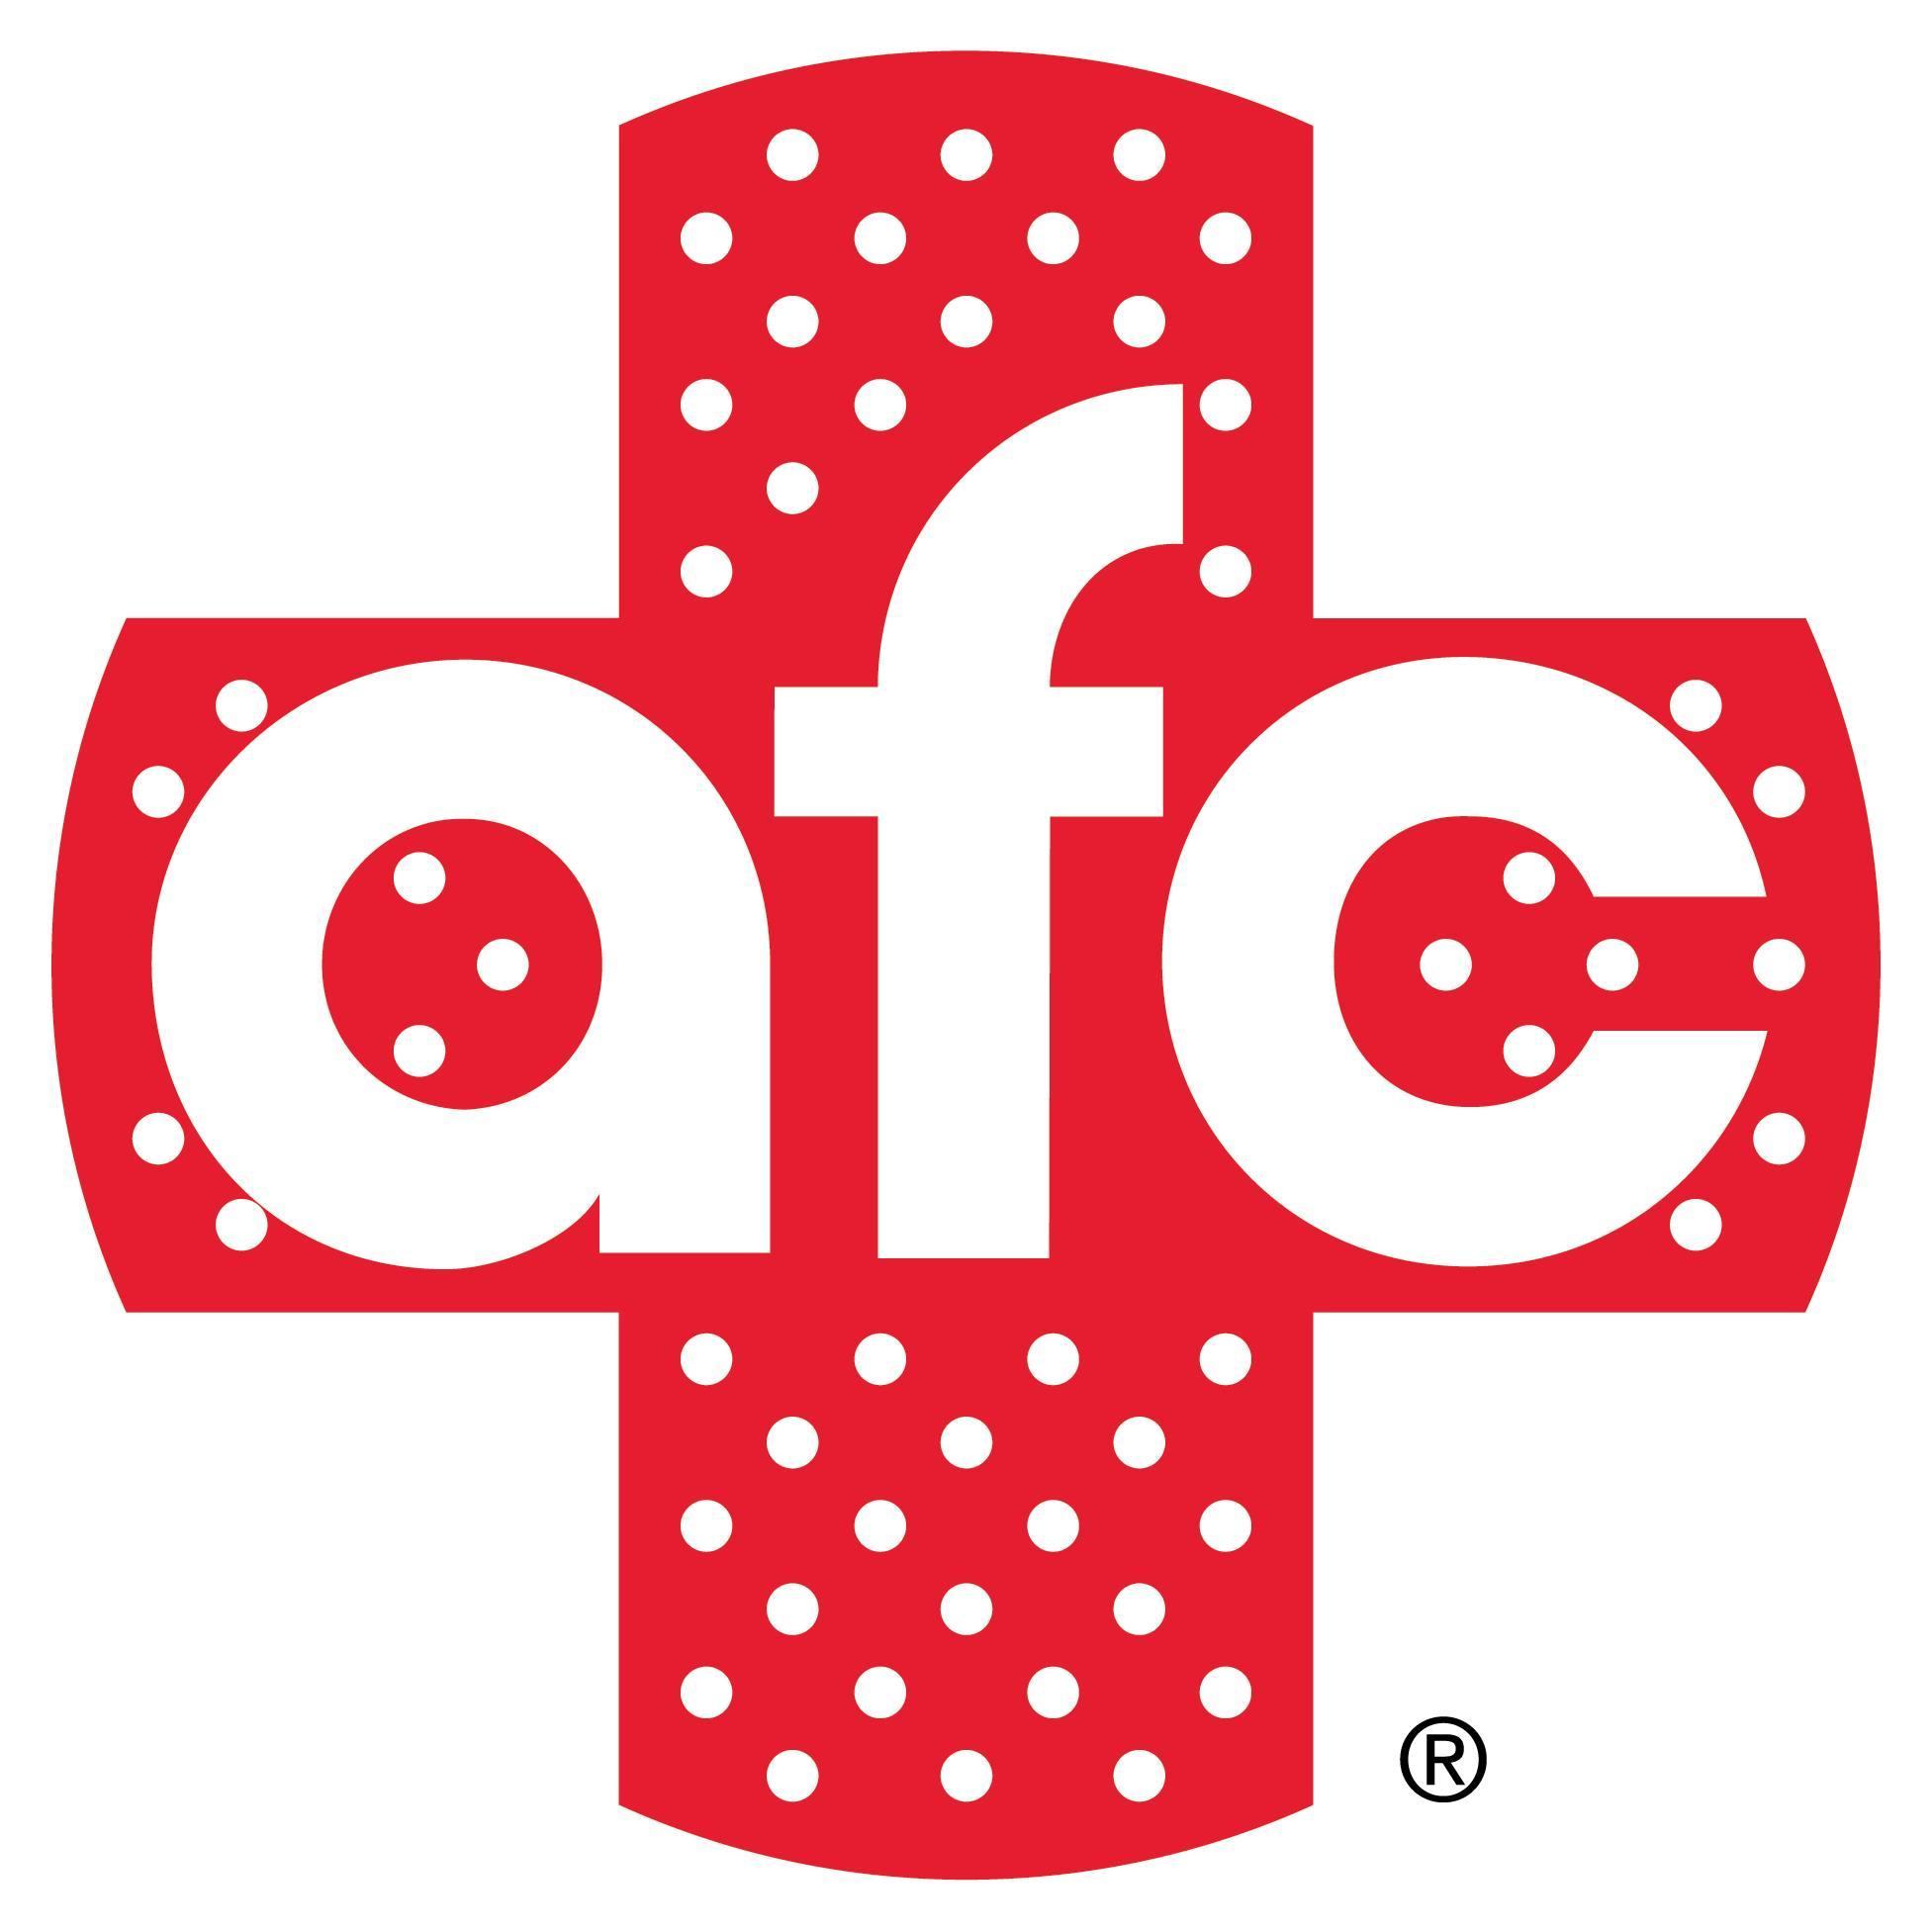 AFC Urgent Care Facility in Burke, Virginia, is getting praised for its efficient team and services since its launch on Jan 14th